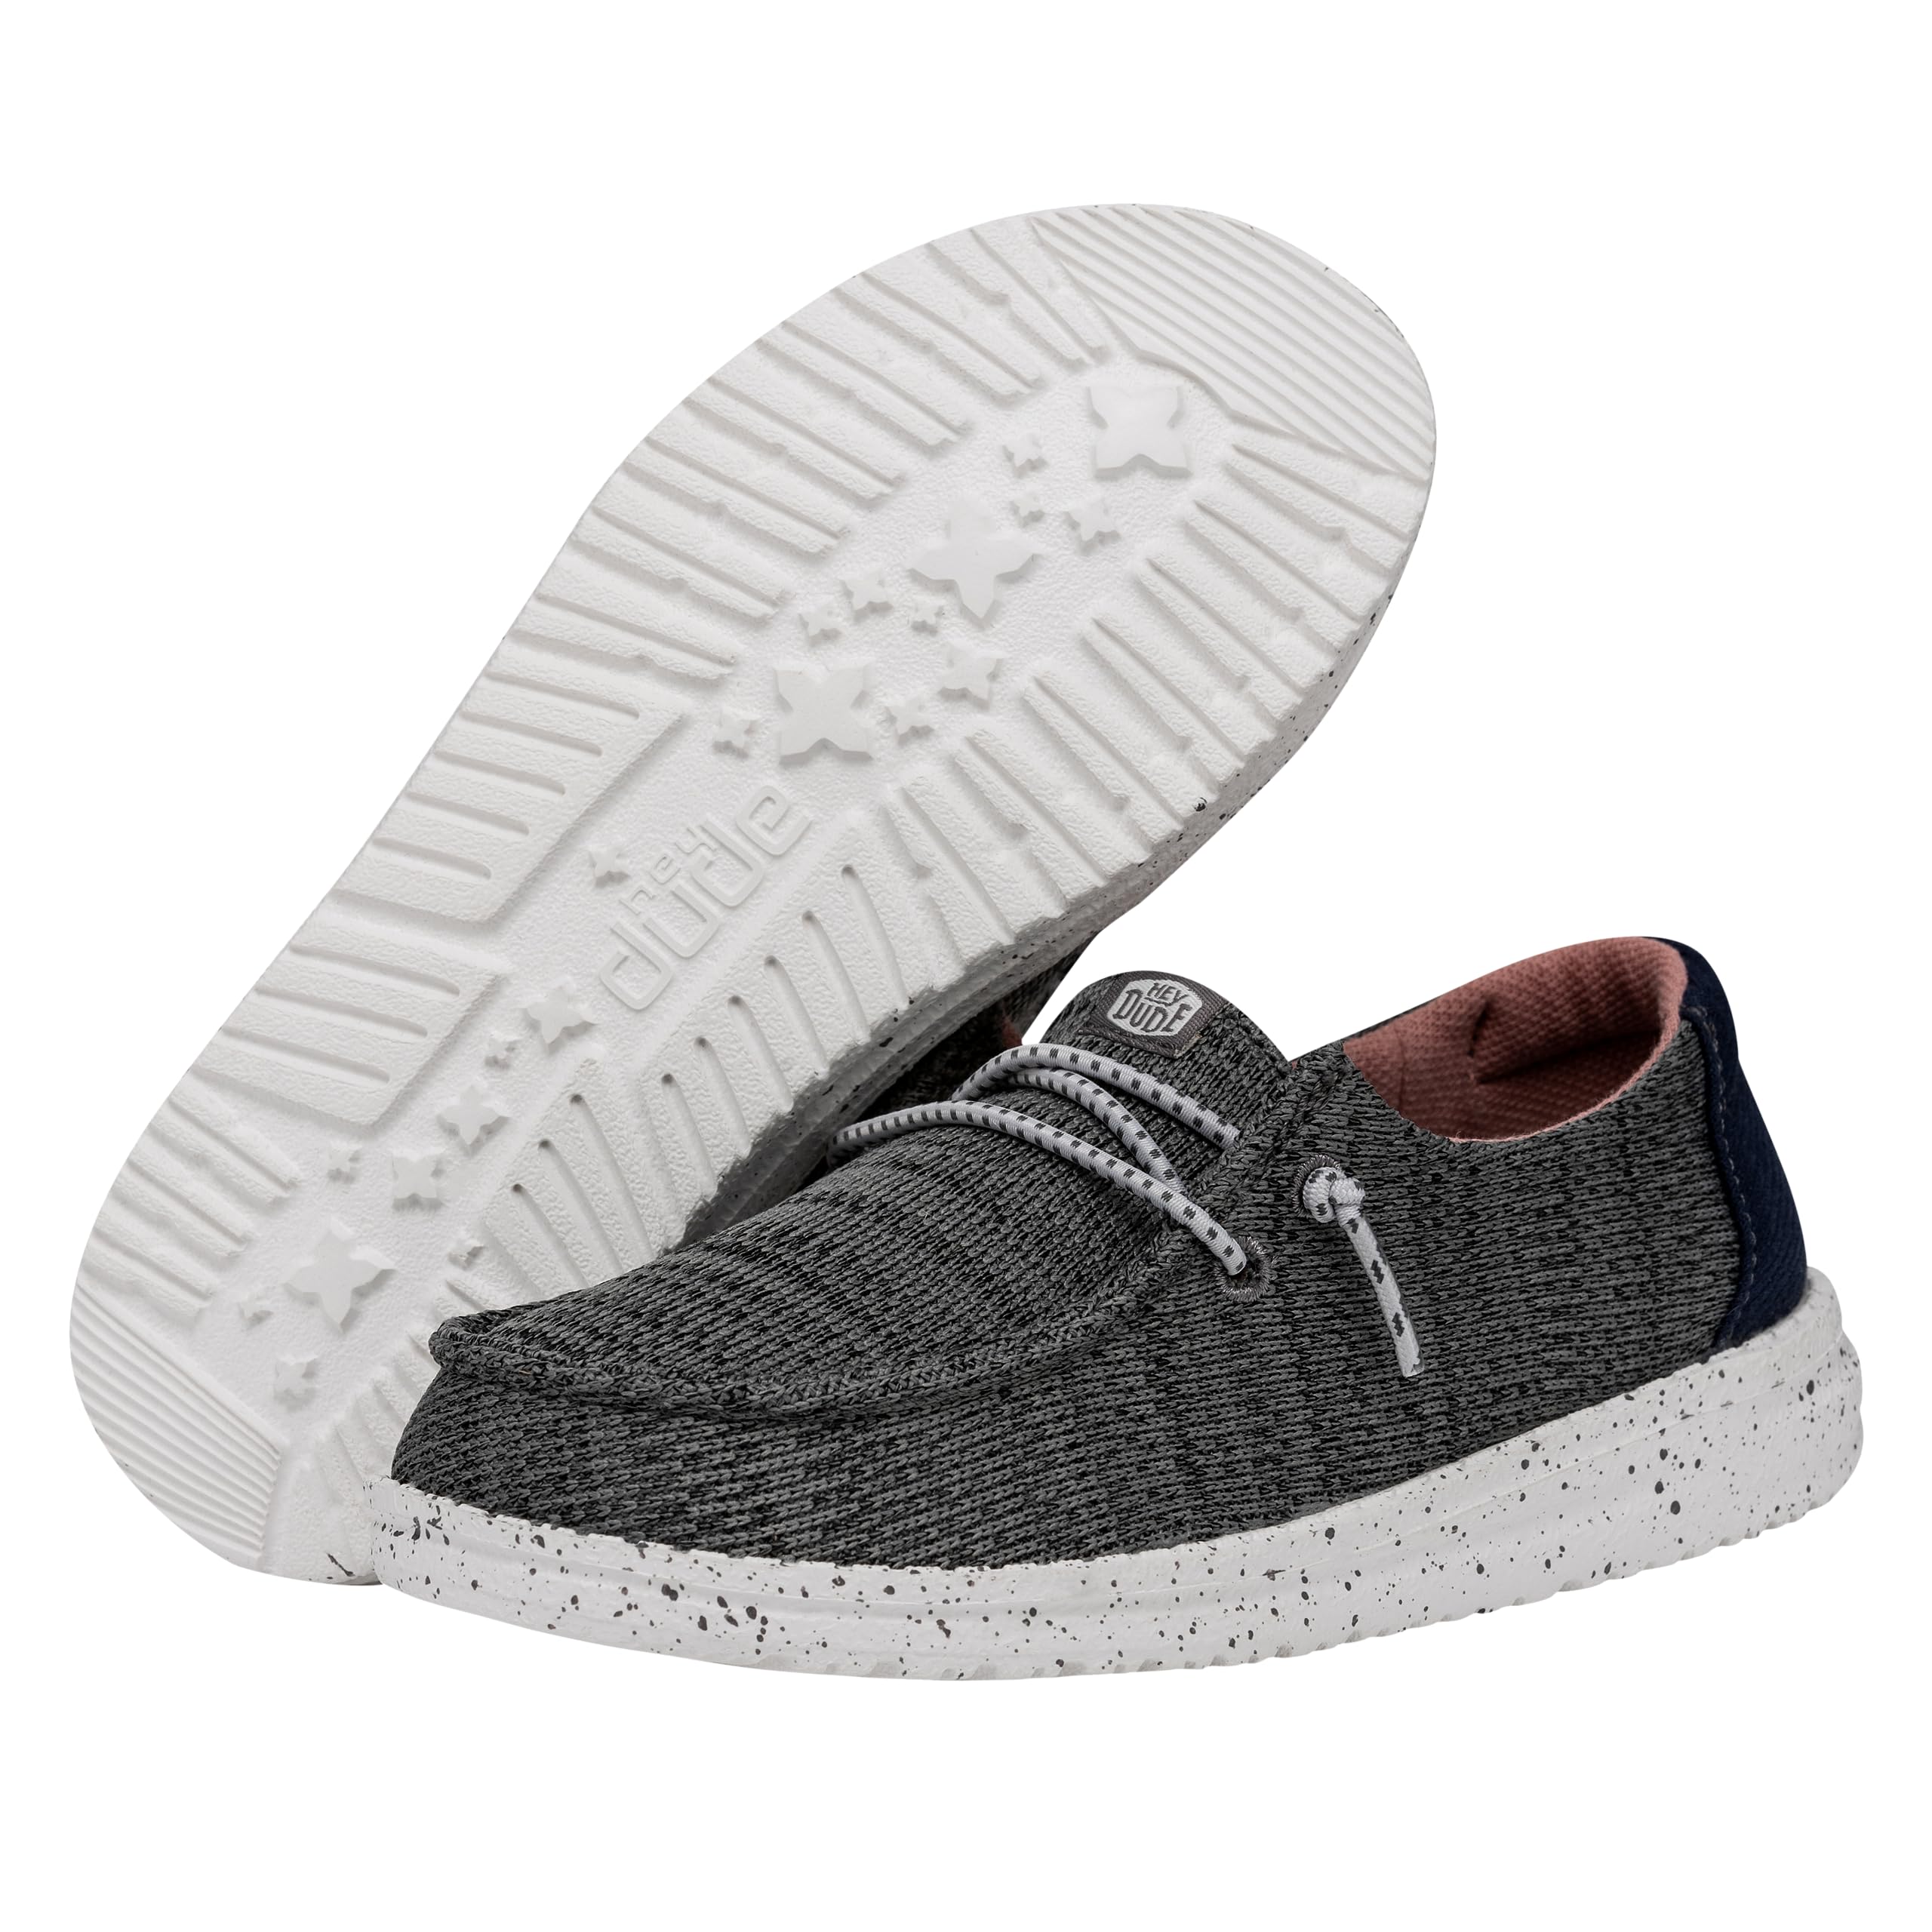 Hey Dude Wendy Sport Mesh | Women's Loafers | Women's Slip On Shoes | Comfortable & Light Weight